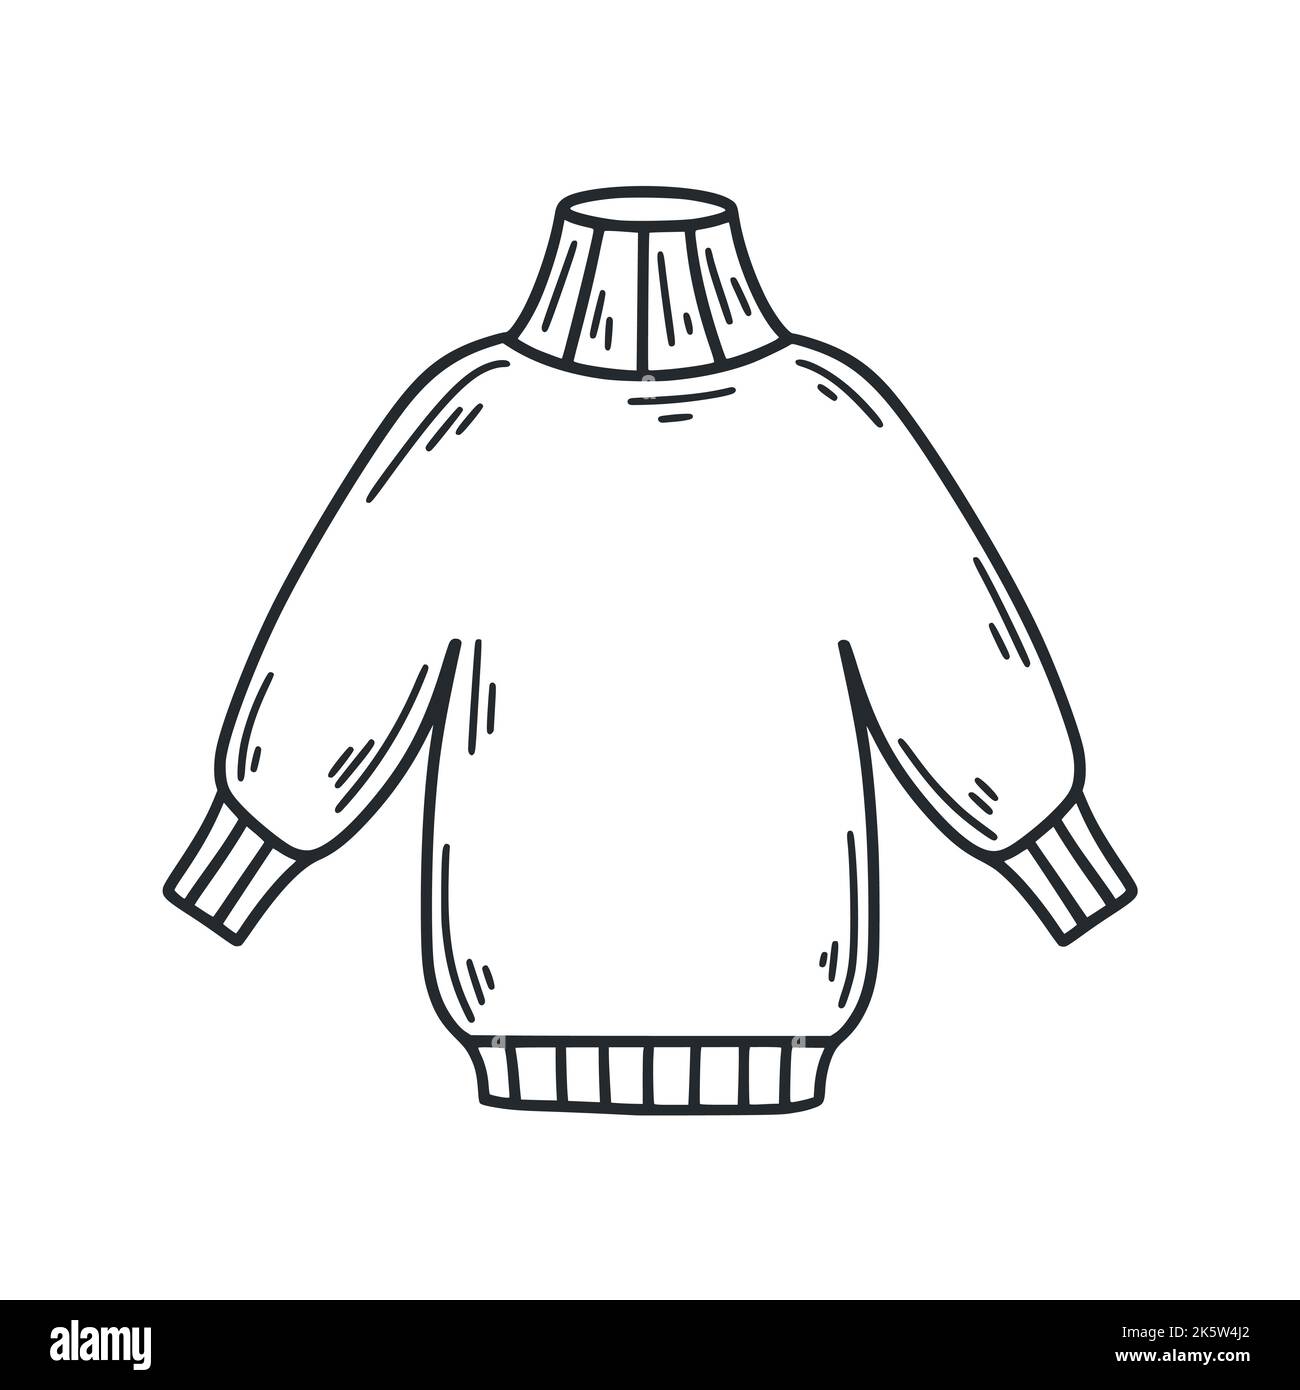 Knitted sweater doodle illustration. Clothes and accessories sketch isolated vector. Casual aesthetic sweatshirt black hand drawn outline image Stock Vector